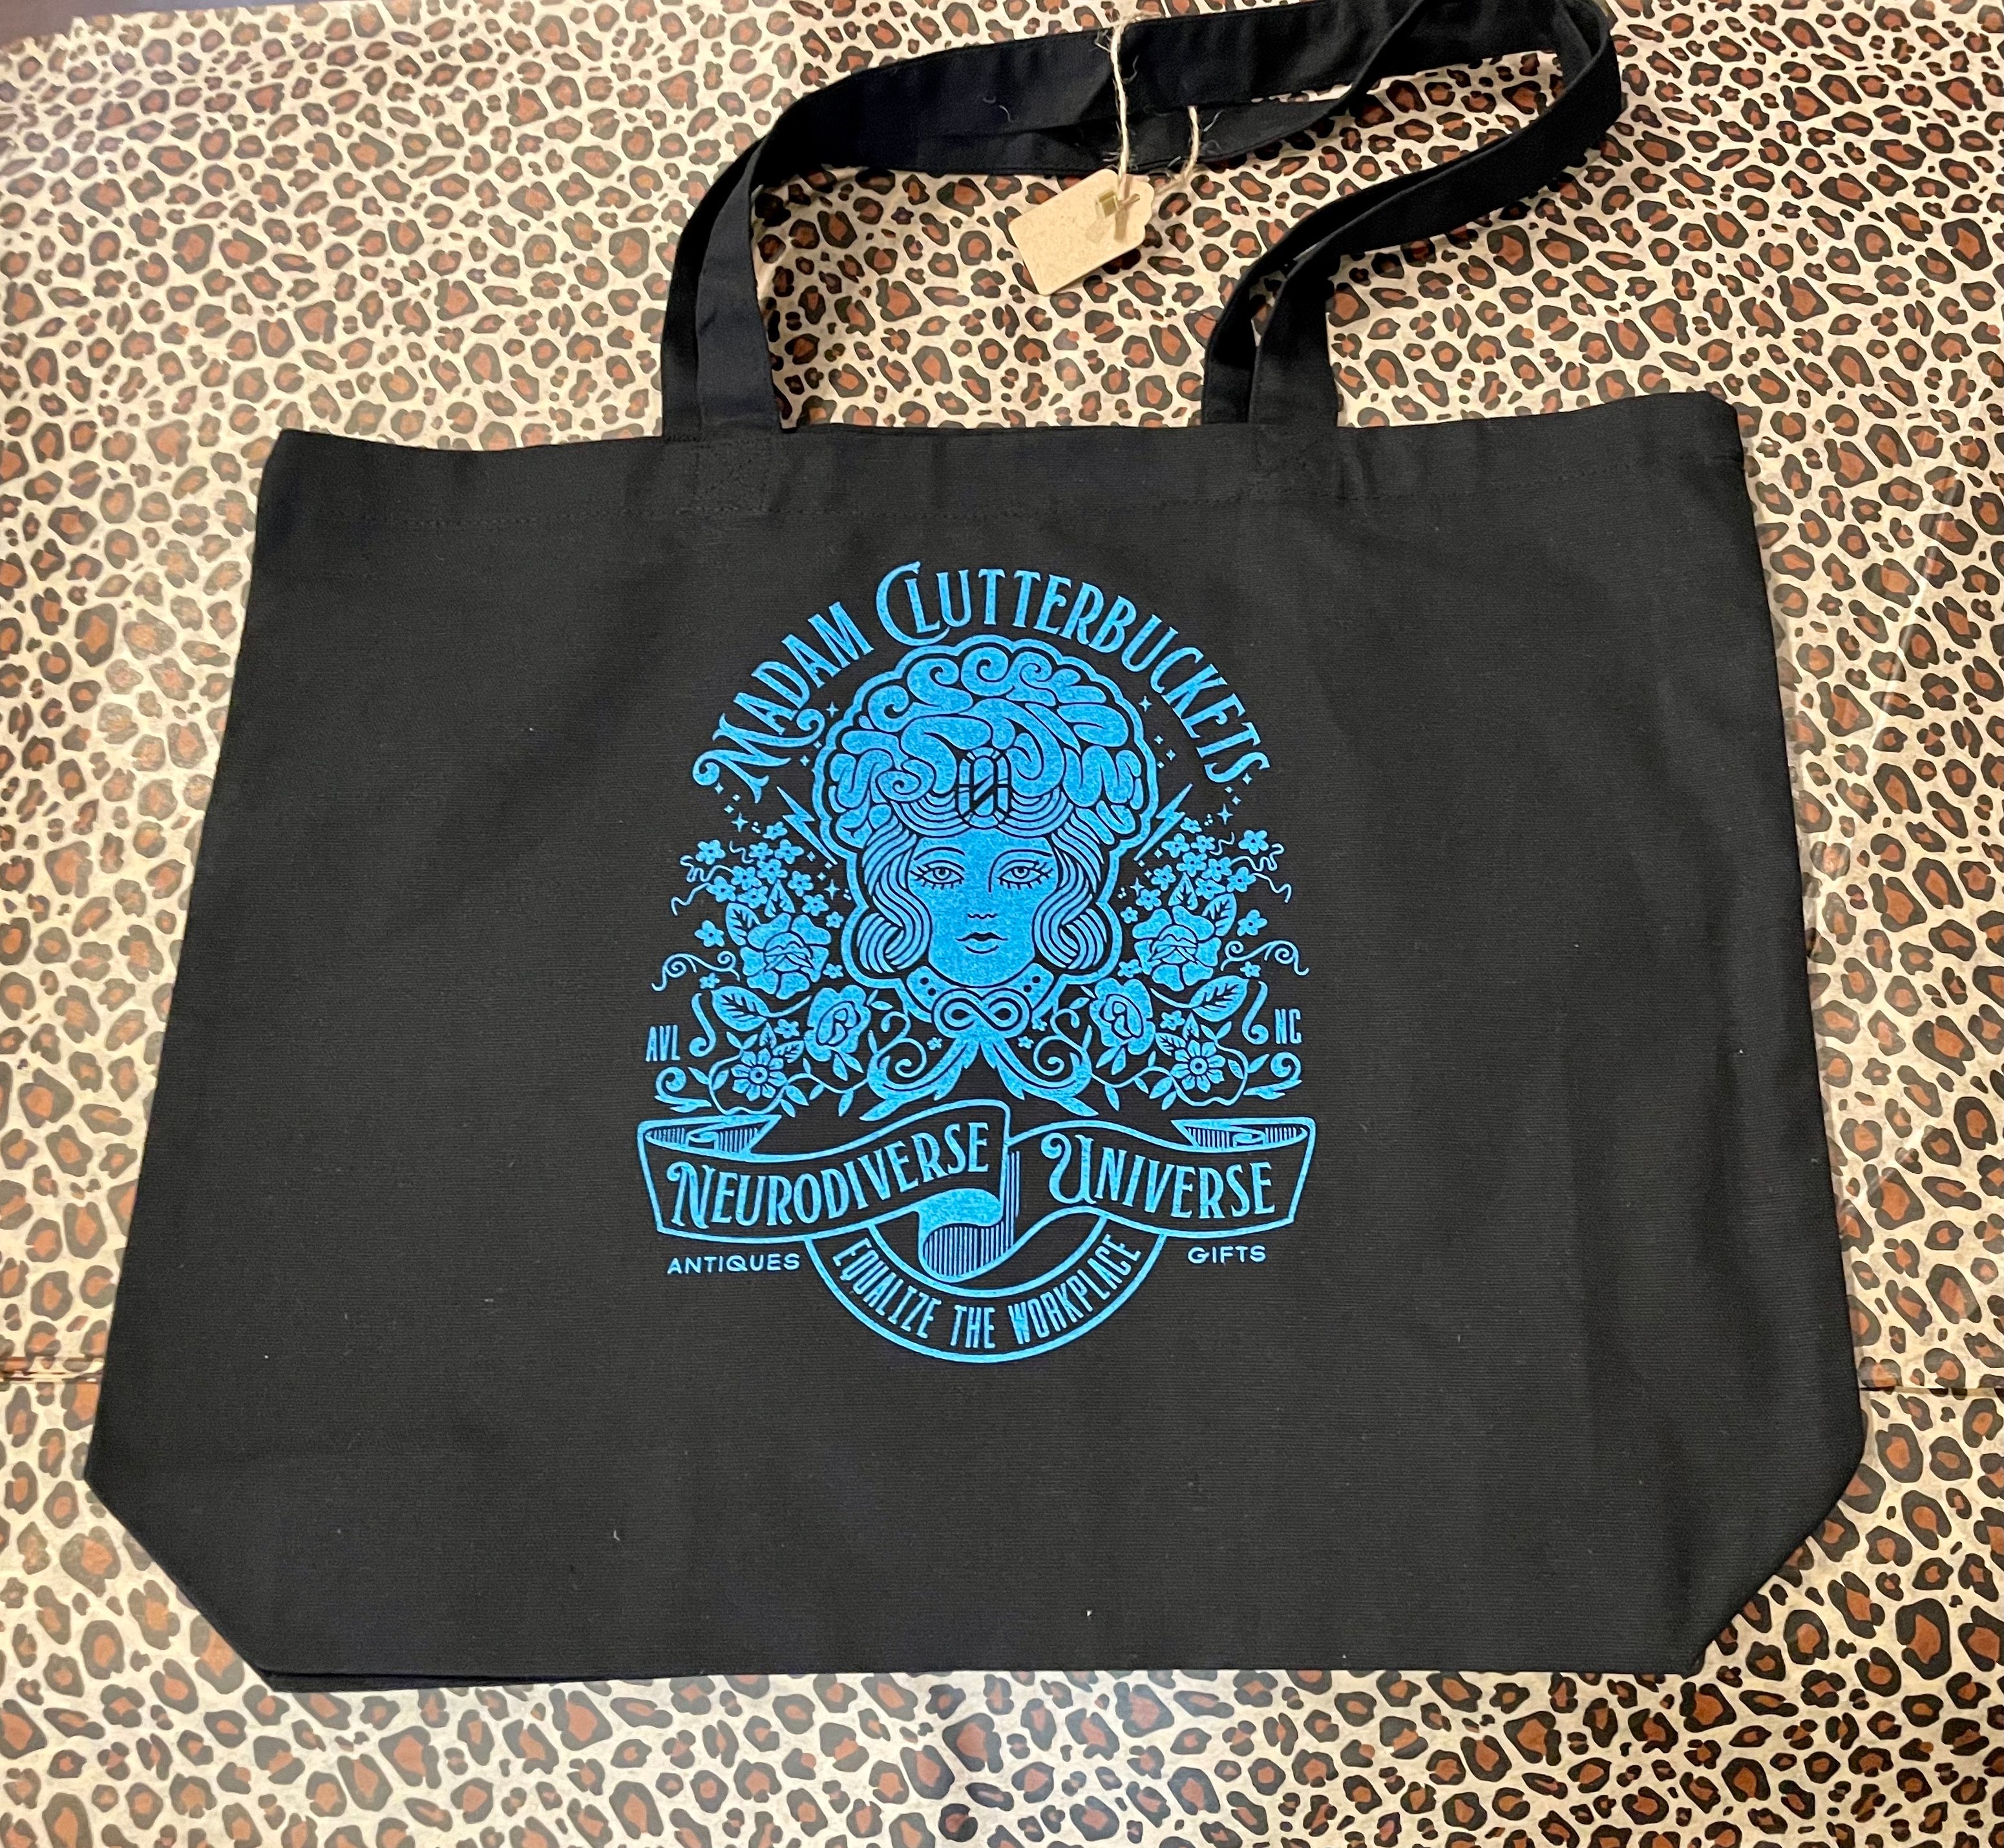 Madam Clutterbucket's Blue Tote Bags!